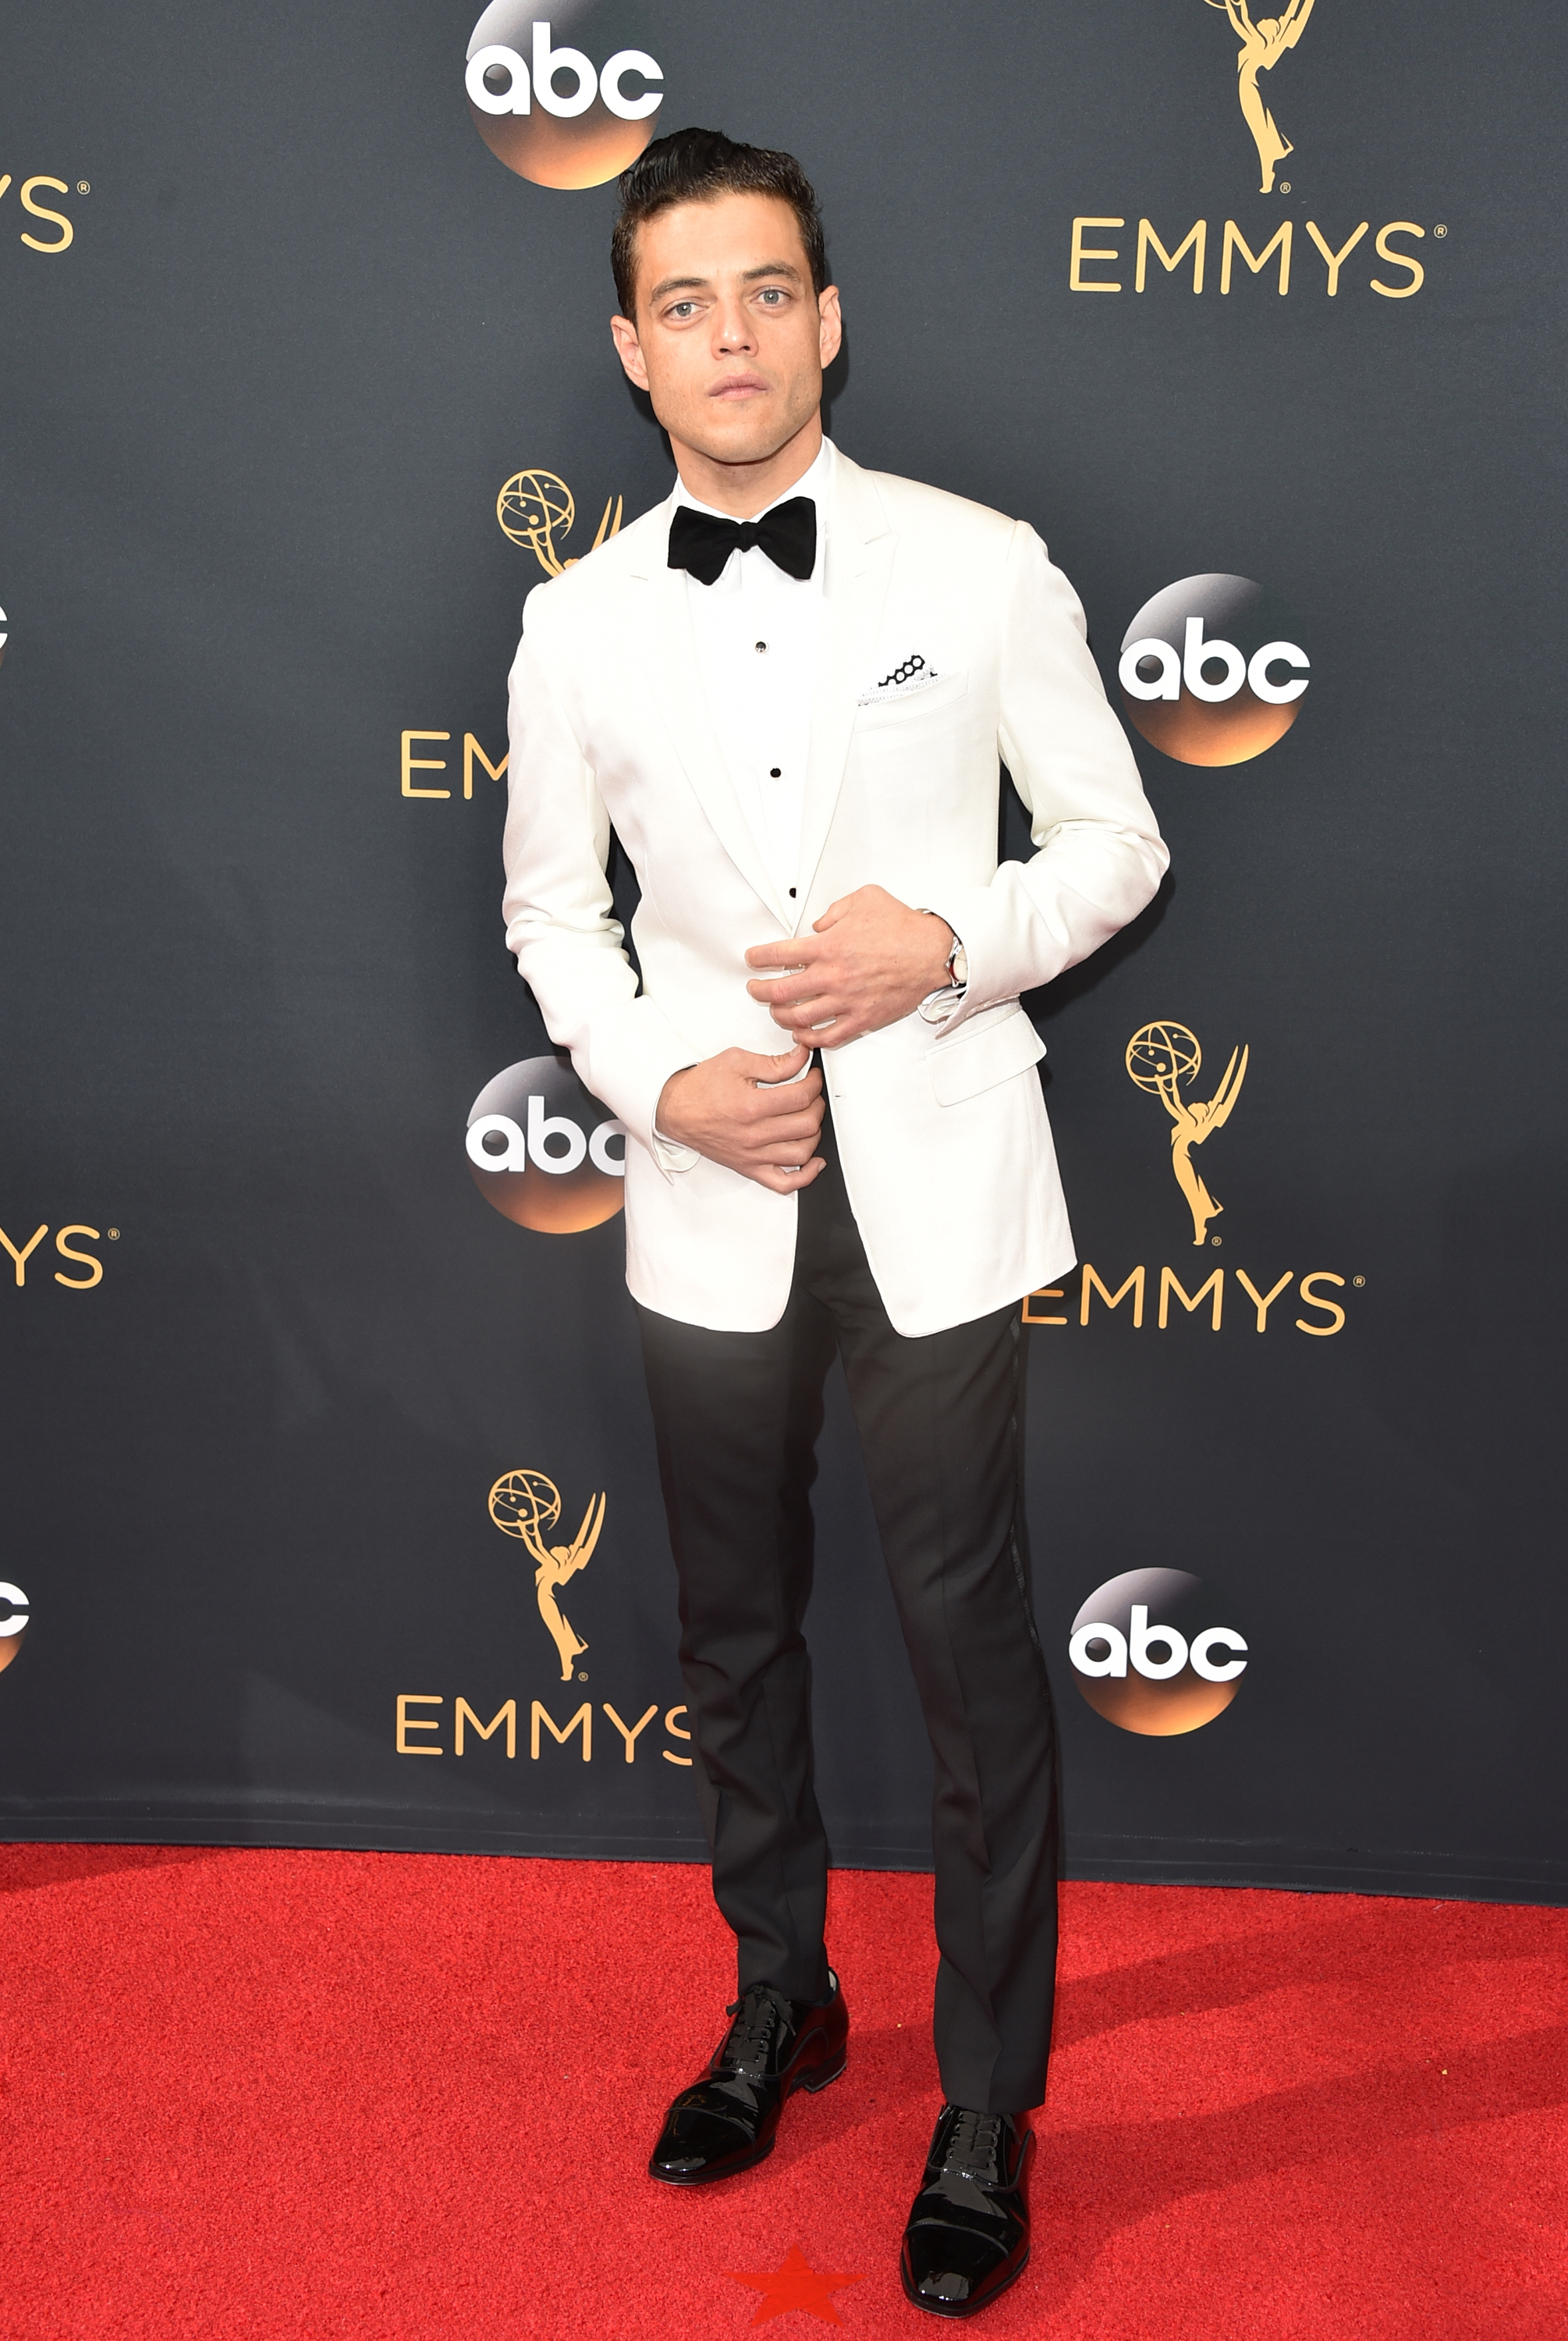 Rami Malek arrives at the 68th Annual Primetime Emmy Awards at Microsoft Theater on September 18, 2016 in Los Angeles.